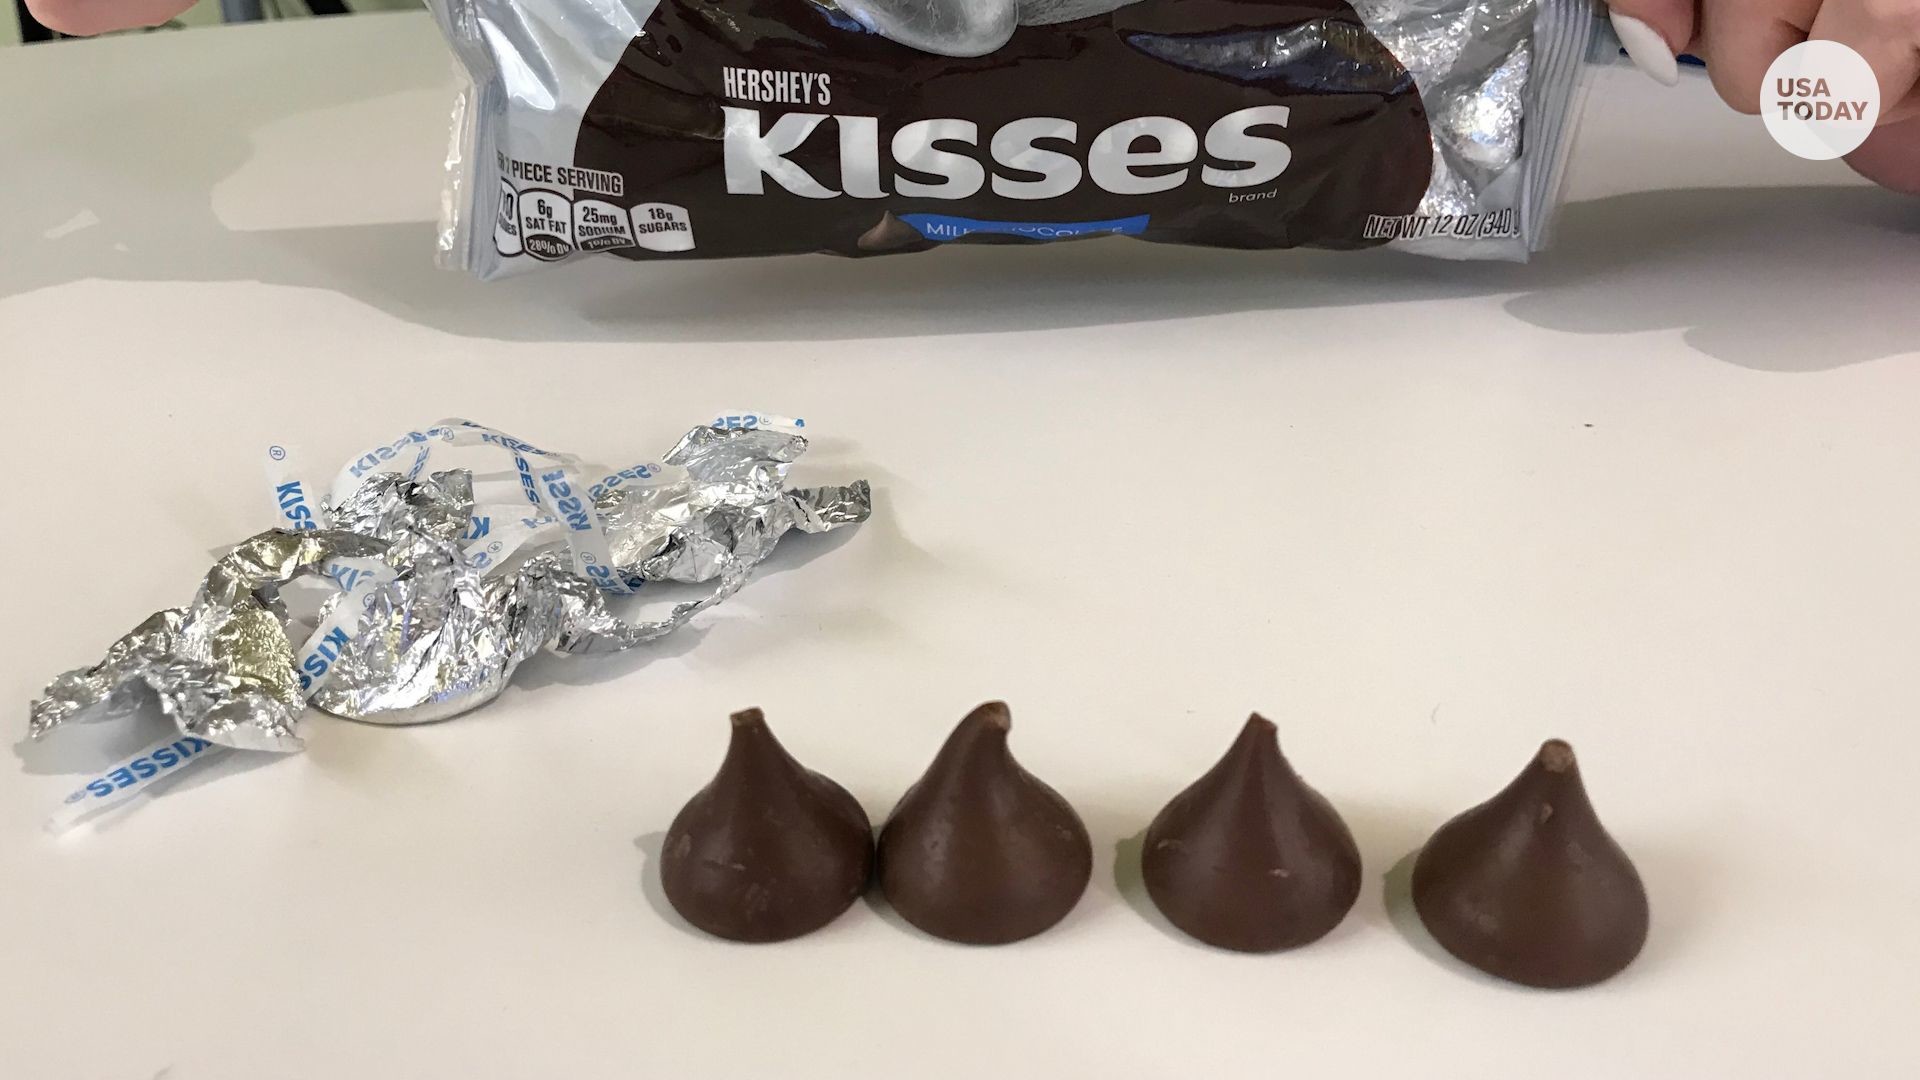 1920x1080 Hershey's Kisses are missing their tips, and people aren't happy